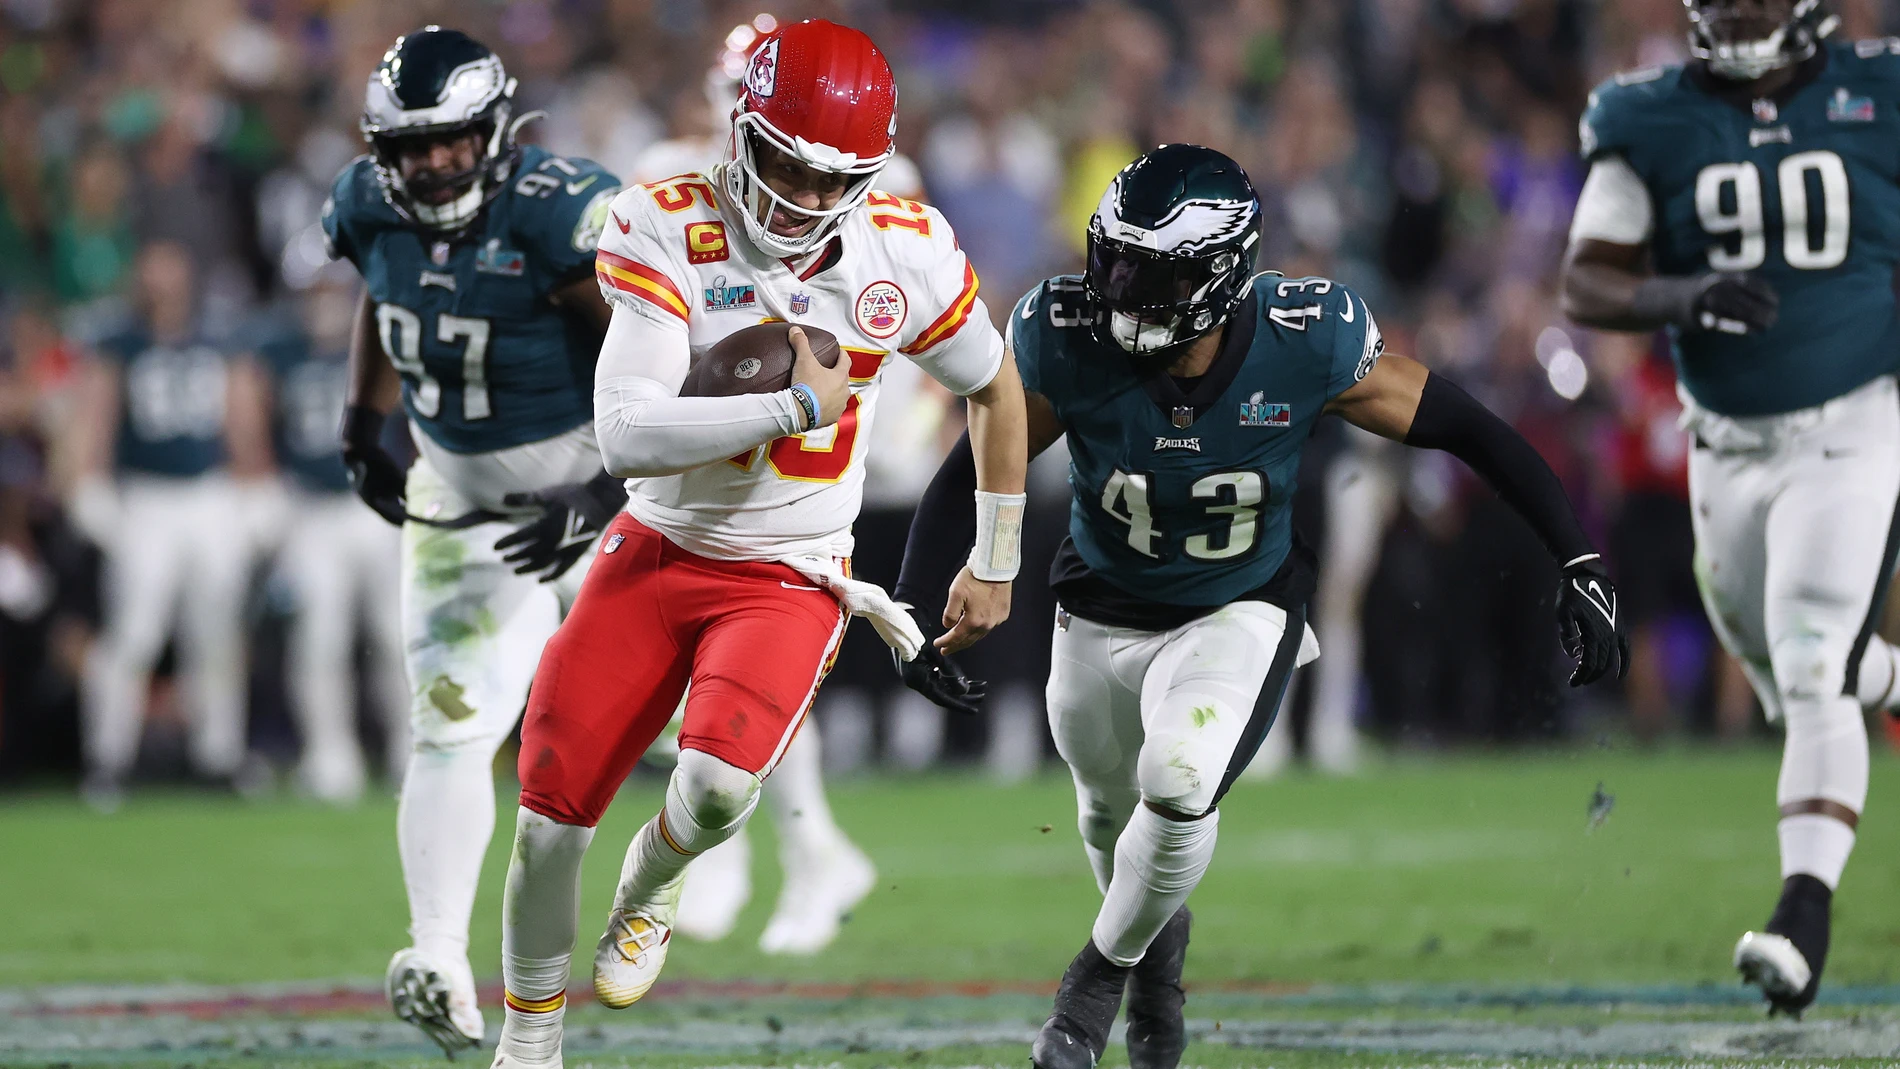 Glendale (United States), 12/02/2023.- Kansas City Chiefs quarterback Patrick Mahomes (L) scrambles for a first down against the Philadelphia Eagles in the fourth quarter of Super Bowl LVII between the AFC champion Kansas City Chiefs and the NFC champion Philadelphia Eagles at State Farm Stadium in Glendale, Arizona, 12 February 2023. The annual Super Bowl is the Championship game of the NFL between the AFC Champion and the NFC Champion and has been held every year since January of 1967. (Estados Unidos, Filadelfia) EFE/EPA/CAROLINE BREHMAN